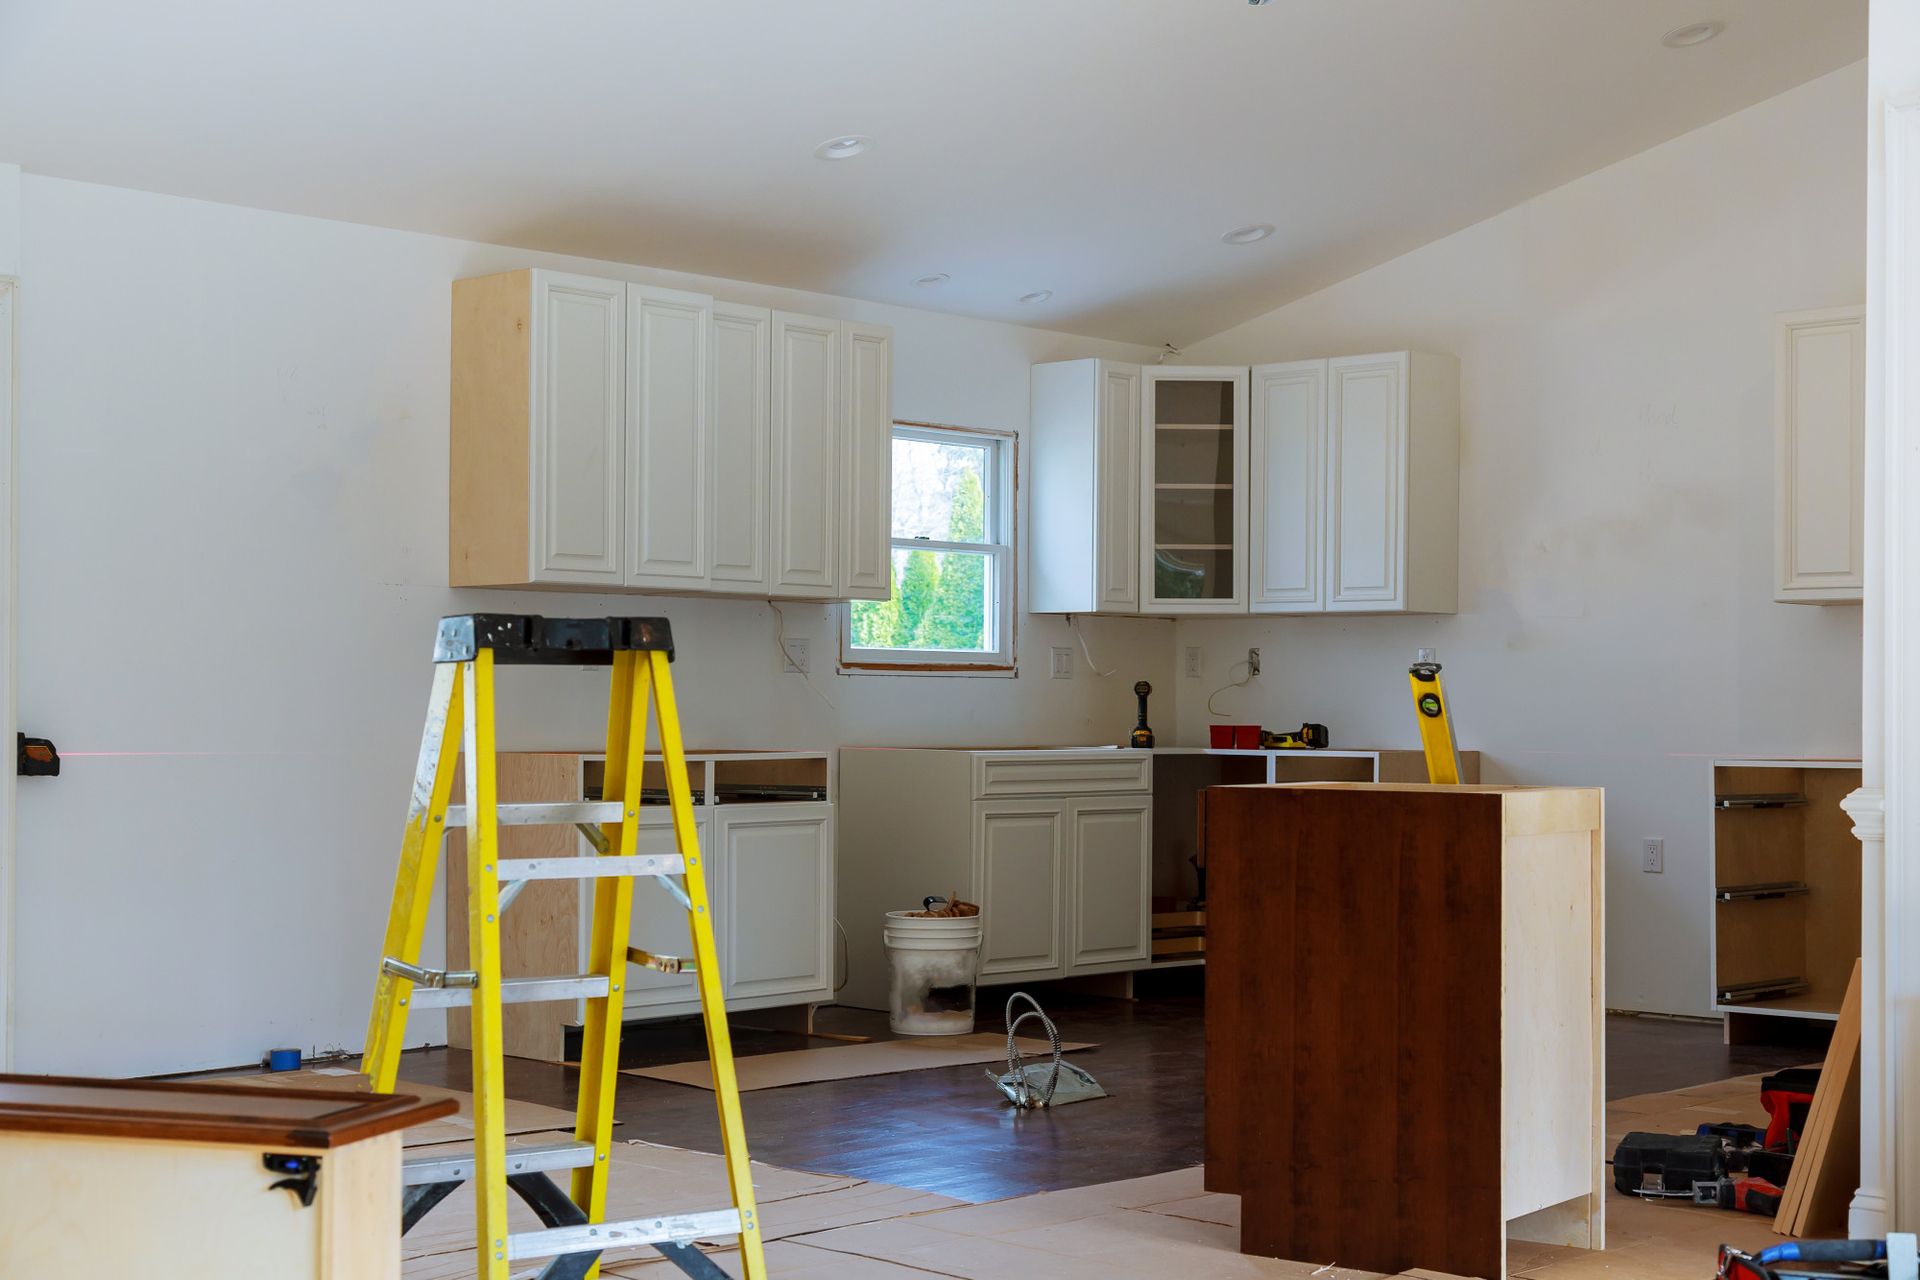 a kitchen is being remodeled with white cabinets and a yellow ladder